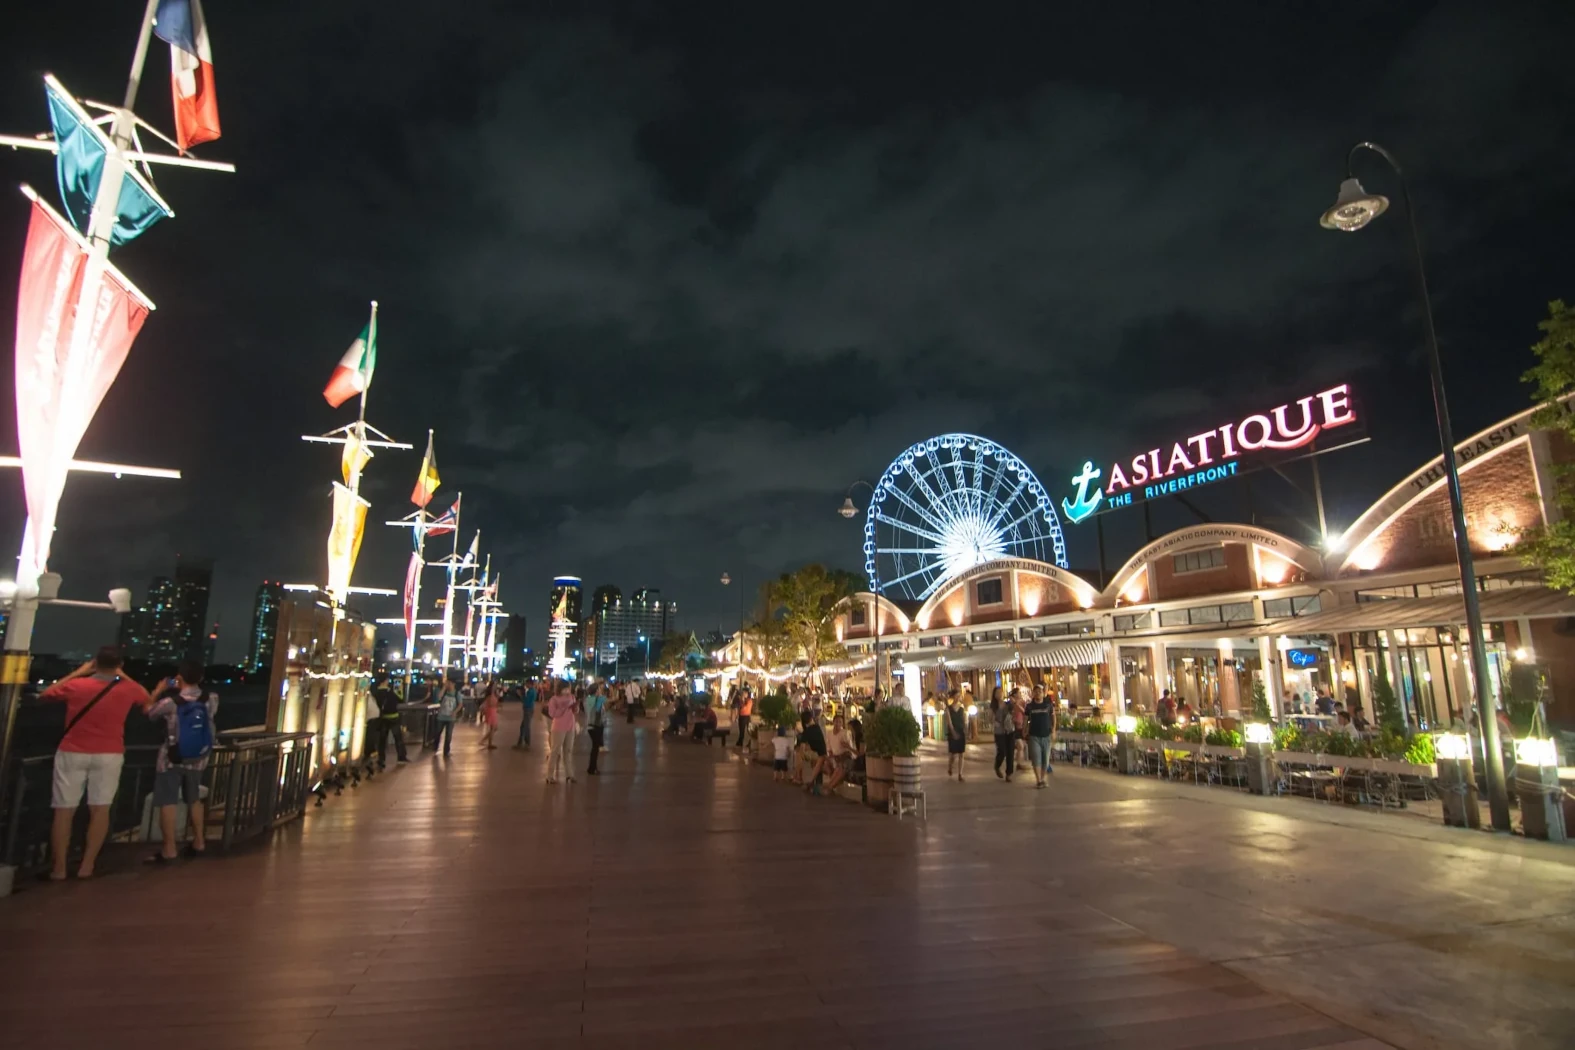 Asiatique The Riverfront night market, illuminated and bustling with activity.